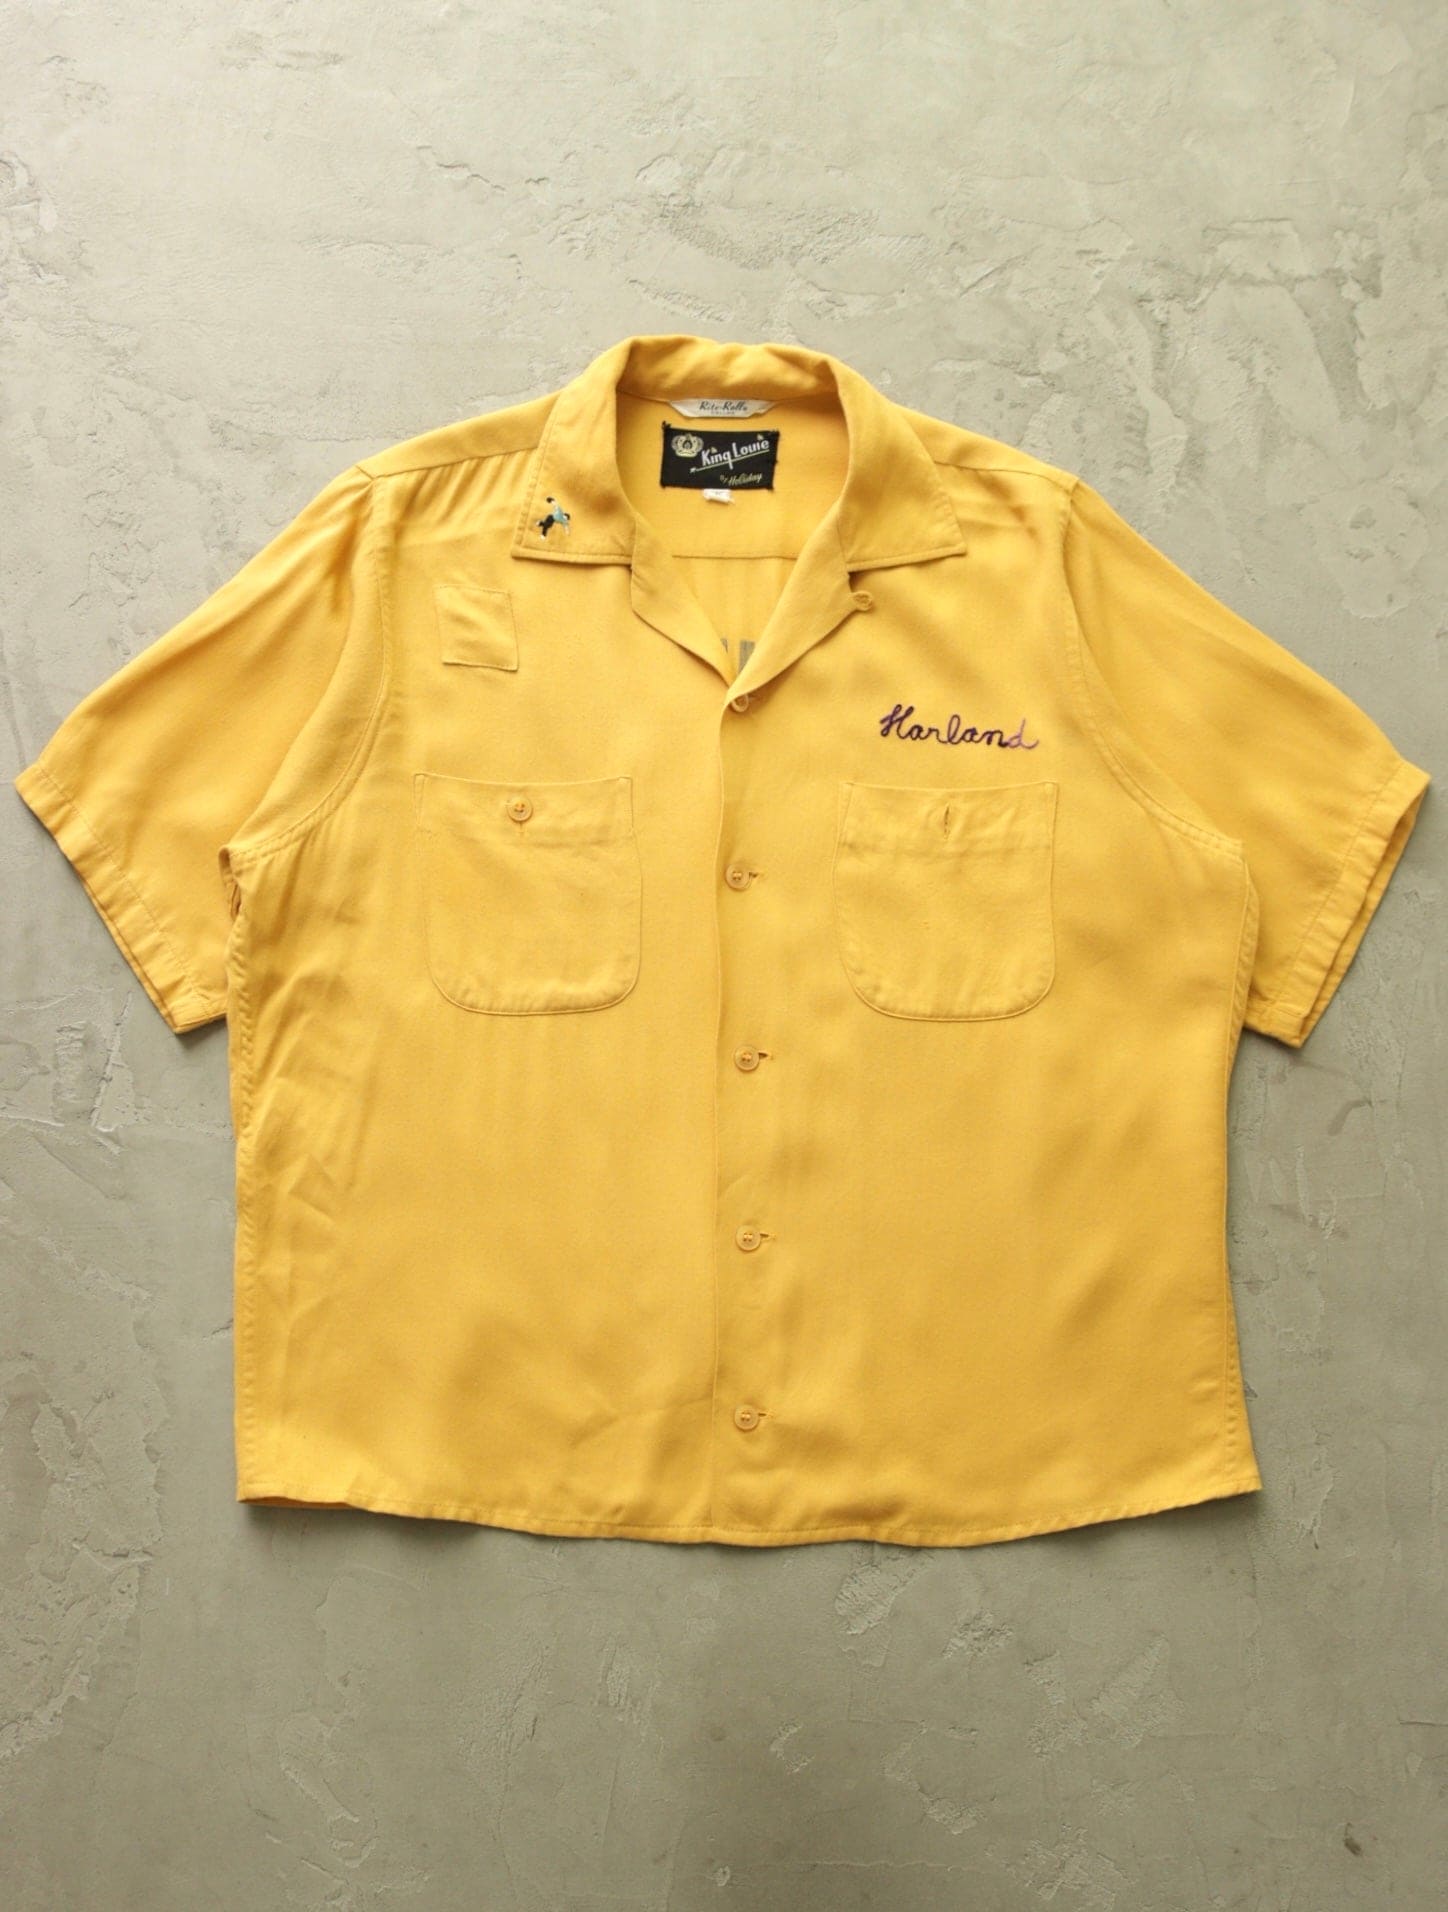 1970S HARLAND REPAIRED BOXY BOWLING SHIRT - TWO FOLD